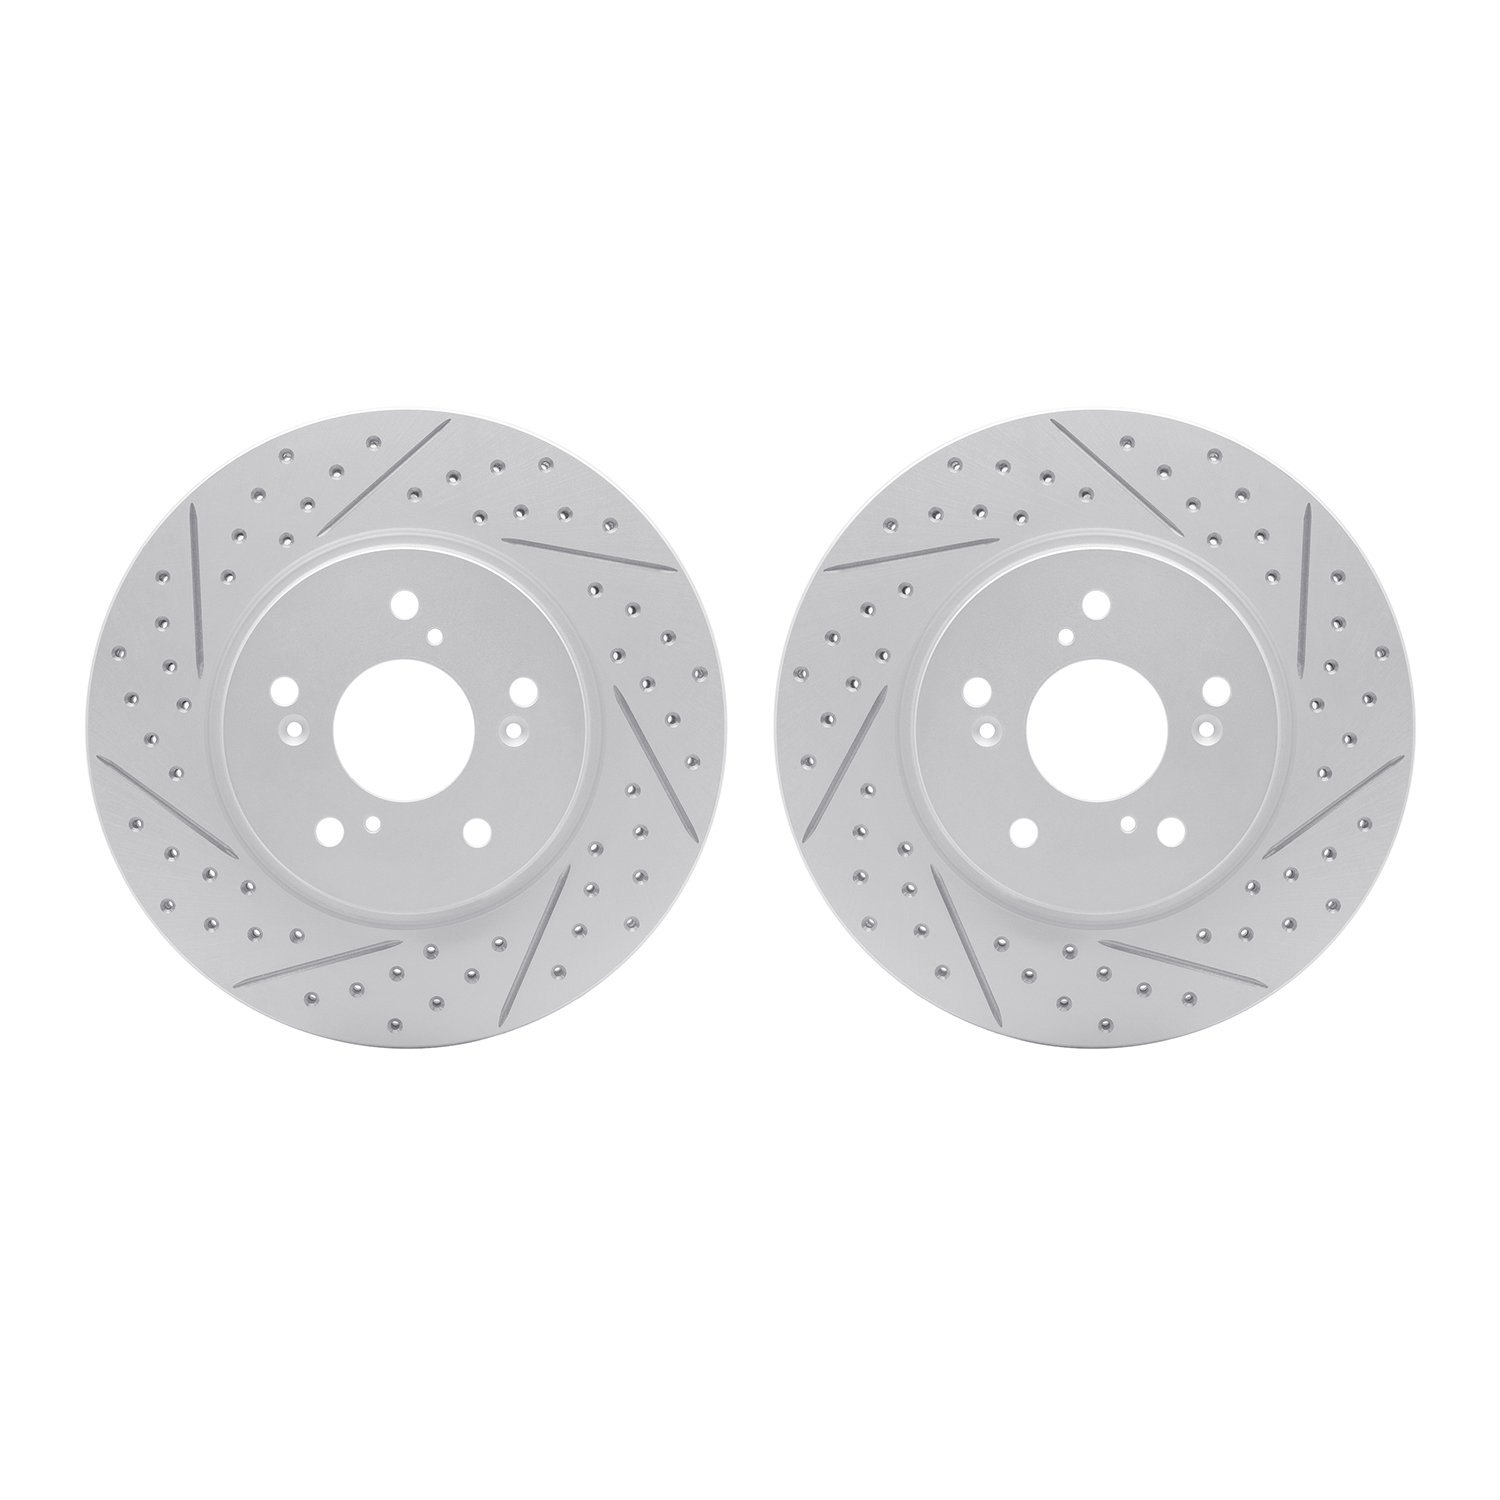 2002-59013 Geoperformance Drilled/Slotted Brake Rotors, 2007-2016 Acura/Honda, Position: Front